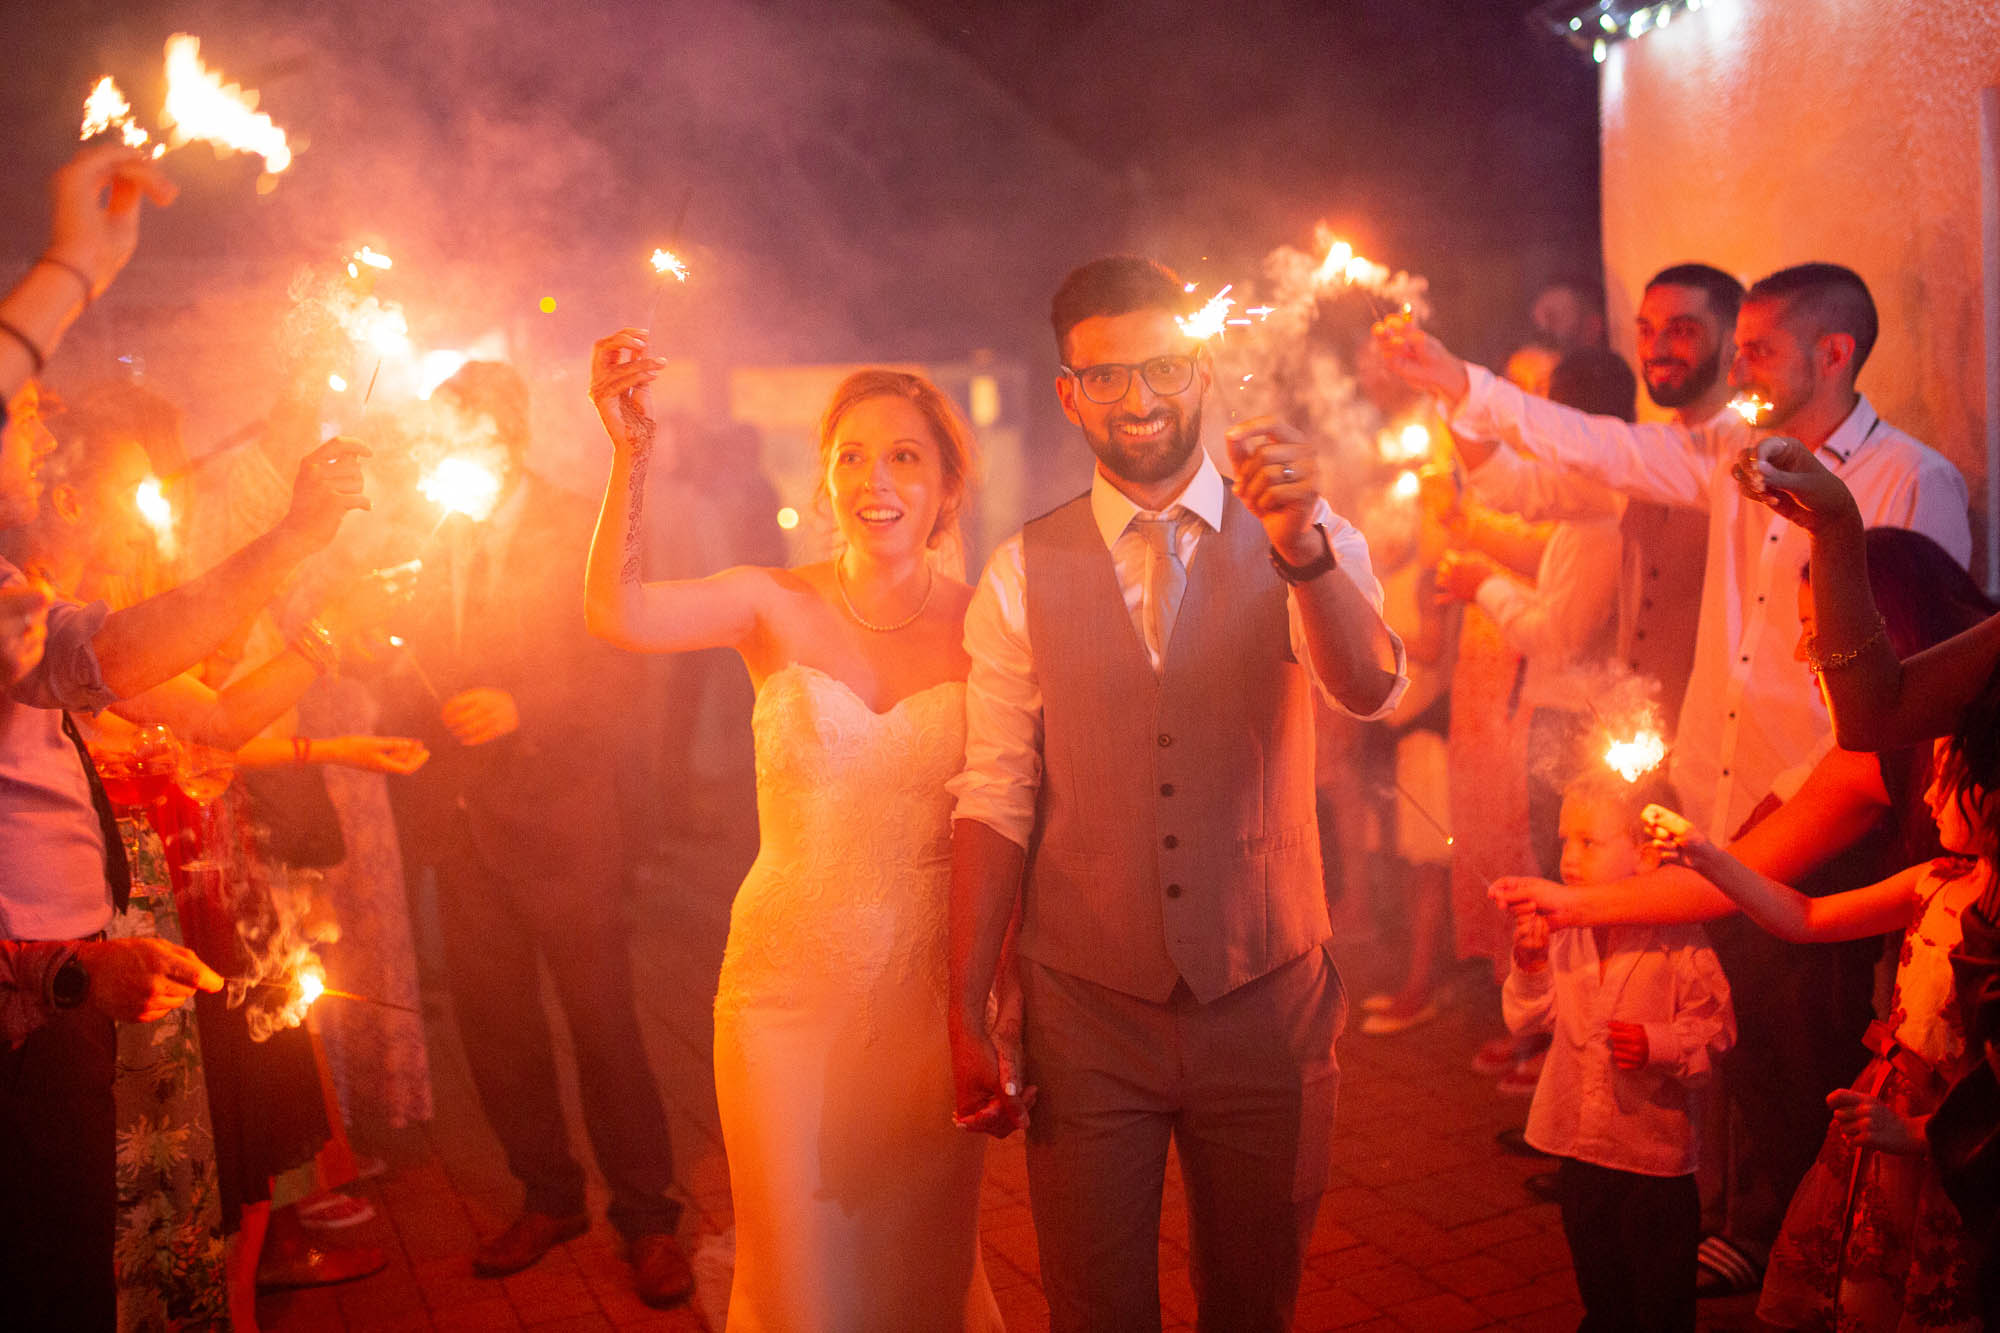 Hannah and Zak's Aldwick Estate wedding captured by Martin Dabek Photography.